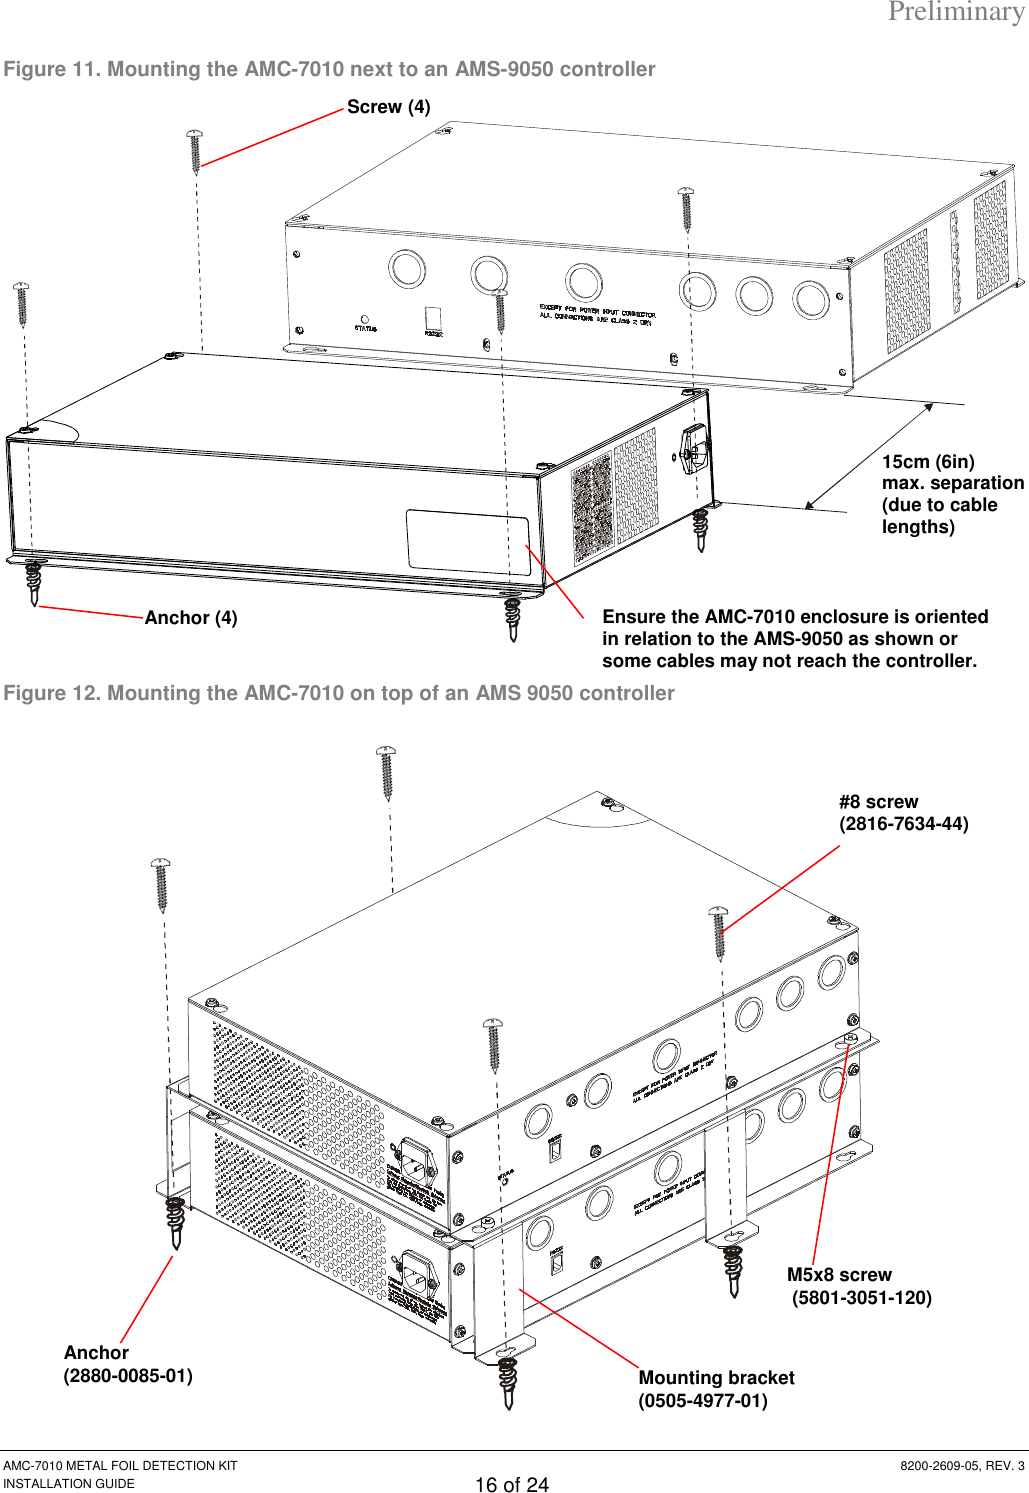 Preliminary AMC-7010 METAL FOIL DETECTION KIT  8200-2609-05, REV. 3 INSTALLATION GUIDE 16 of 24 Figure 11. Mounting the AMC-7010 next to an AMS-9050 controller  Figure 12. Mounting the AMC-7010 on top of an AMS 9050 controller  15cm (6in) max. separation (due to cable lengths) Screw (4) Anchor (4) Ensure the AMC-7010 enclosure is oriented in relation to the AMS-9050 as shown or some cables may not reach the controller. Anchor  (2880-0085-01) #8 screw  (2816-7634-44) M5x8 screw  (5801-3051-120) Mounting bracket  (0505-4977-01) 